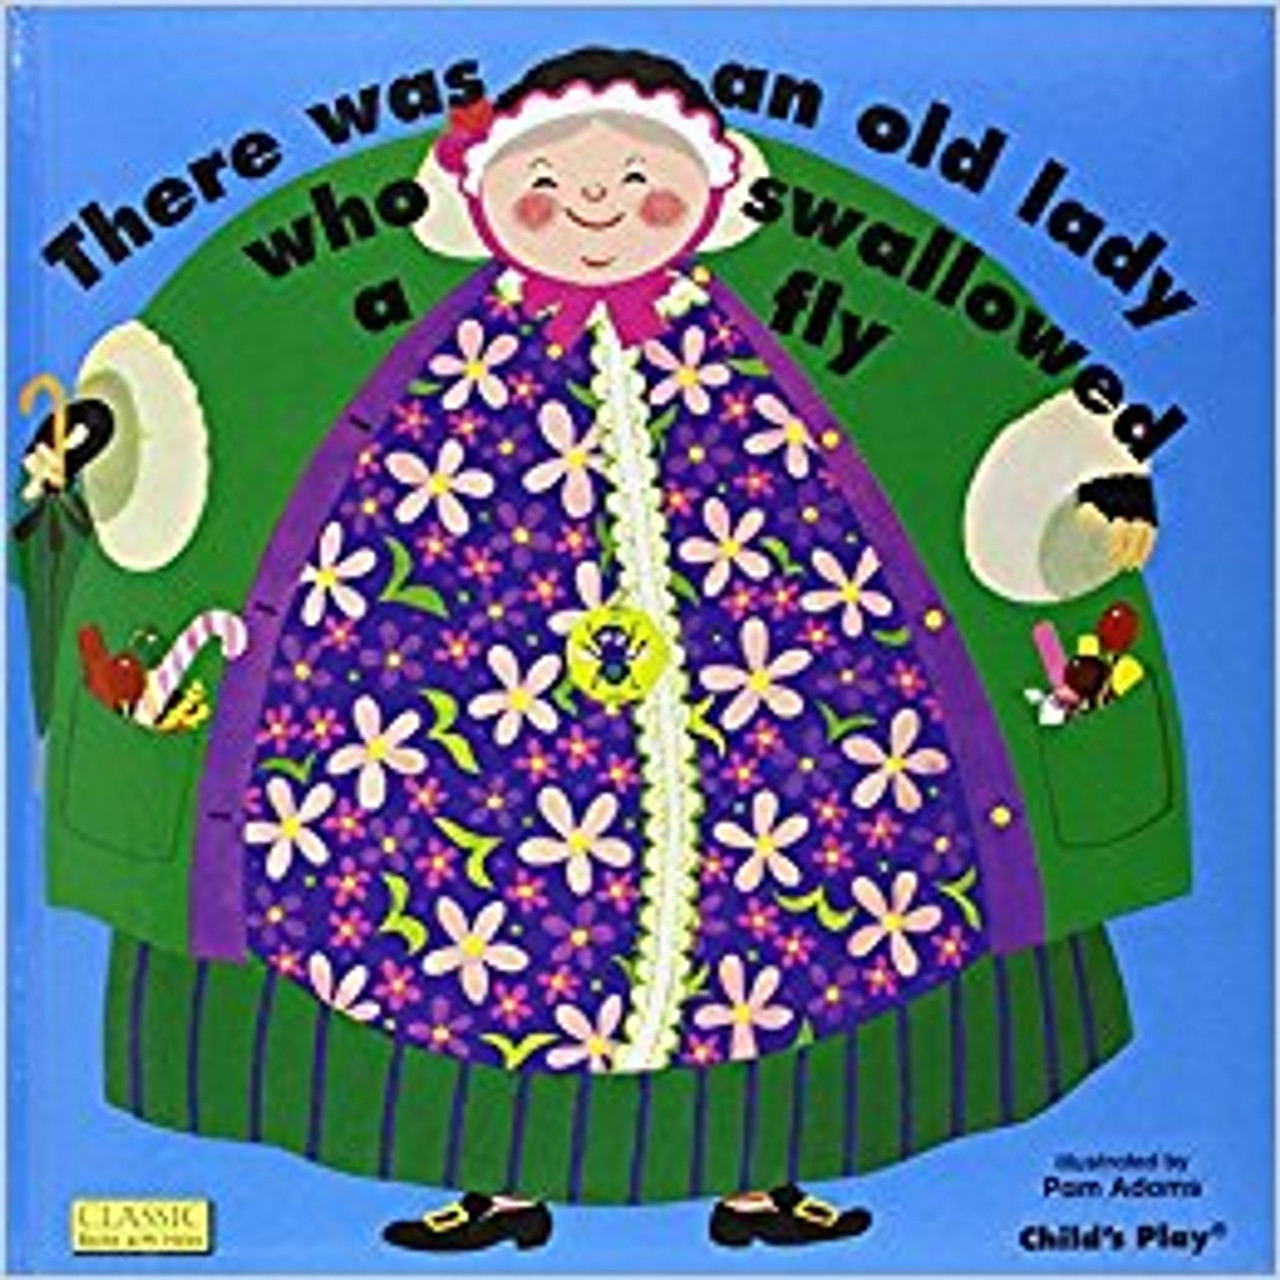 There Was an Old Lady Who Swallowed a Fly by Pam Adams